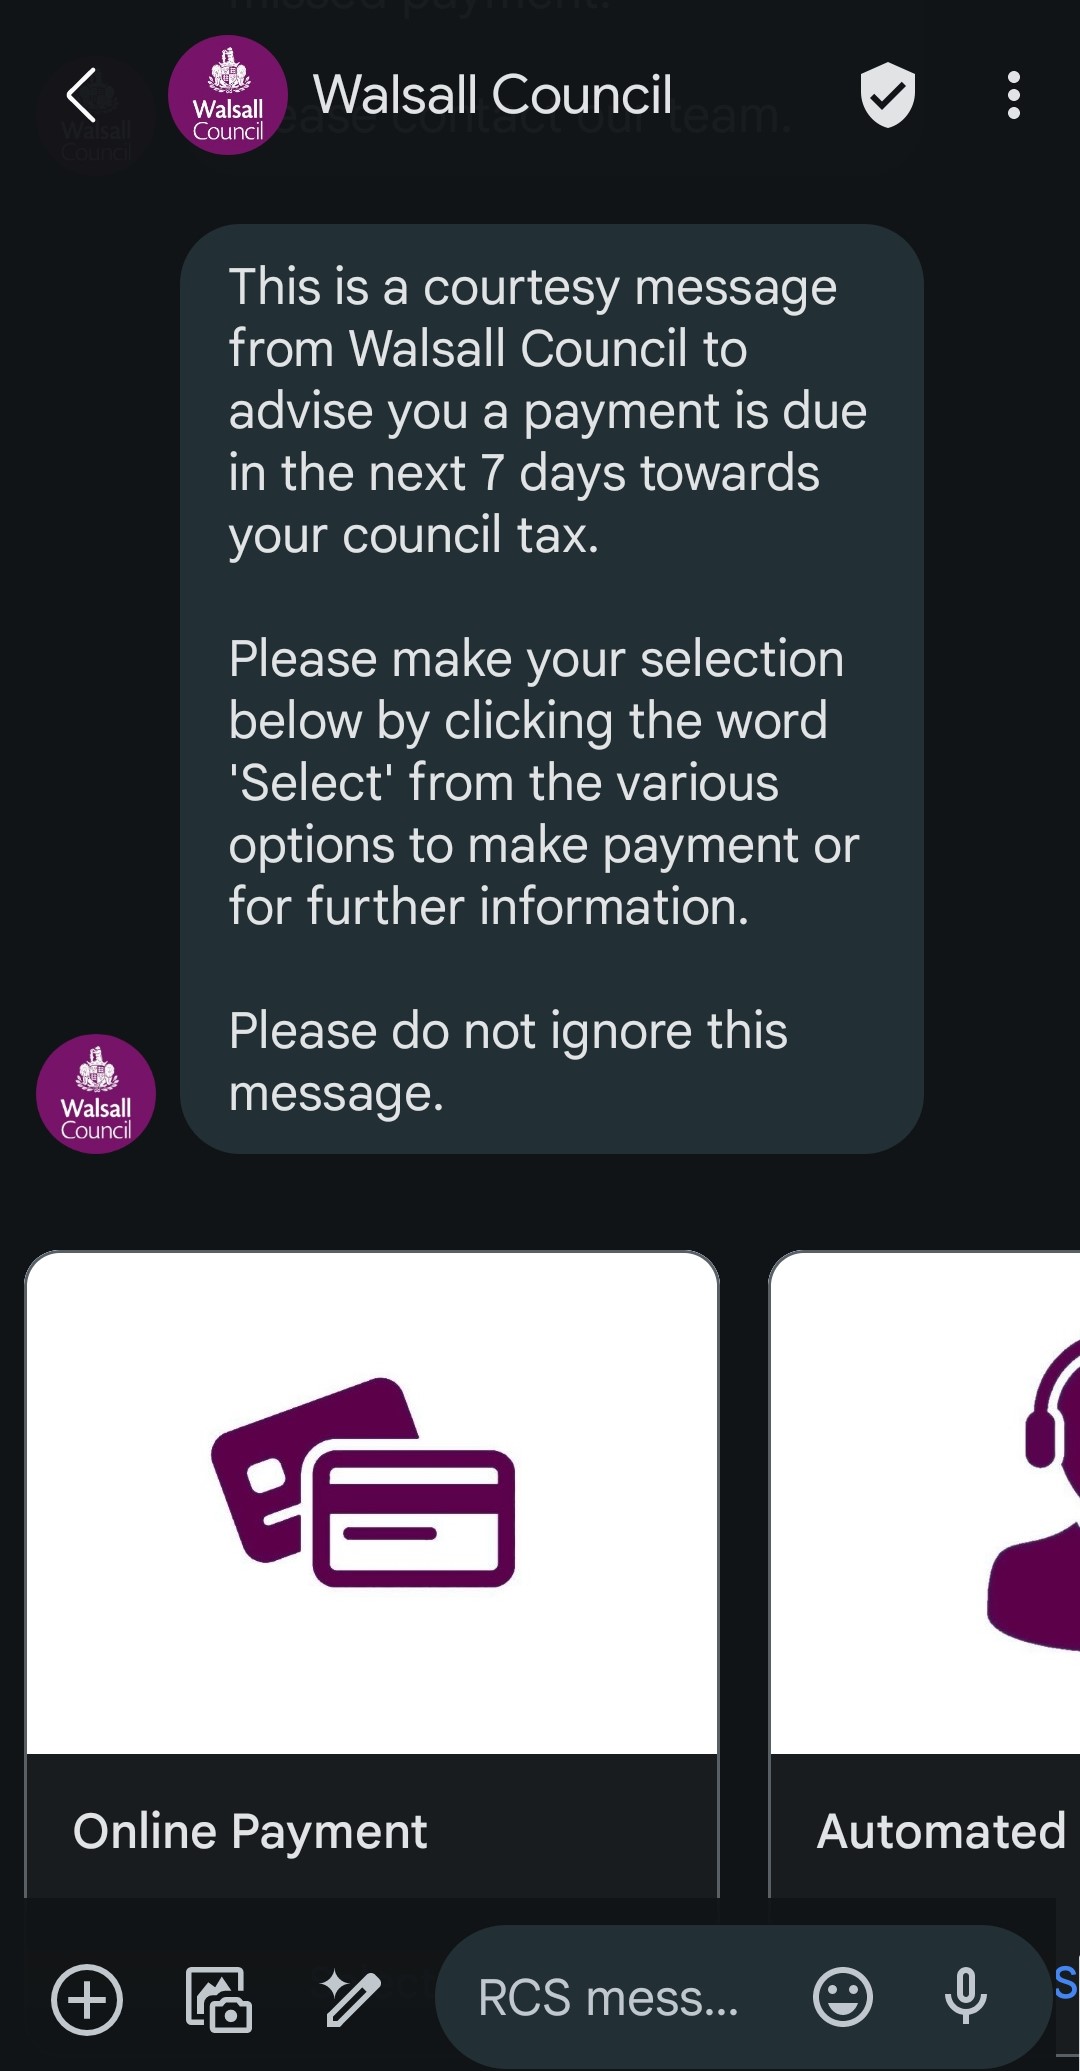 This is a courtesy message from Walsall Council to advise you a payment is due in the next 7 days towards your council tax. Please make your selection below by clicking the word 'Select' from the various options to make payment or for further information. Please do not ignore this message.